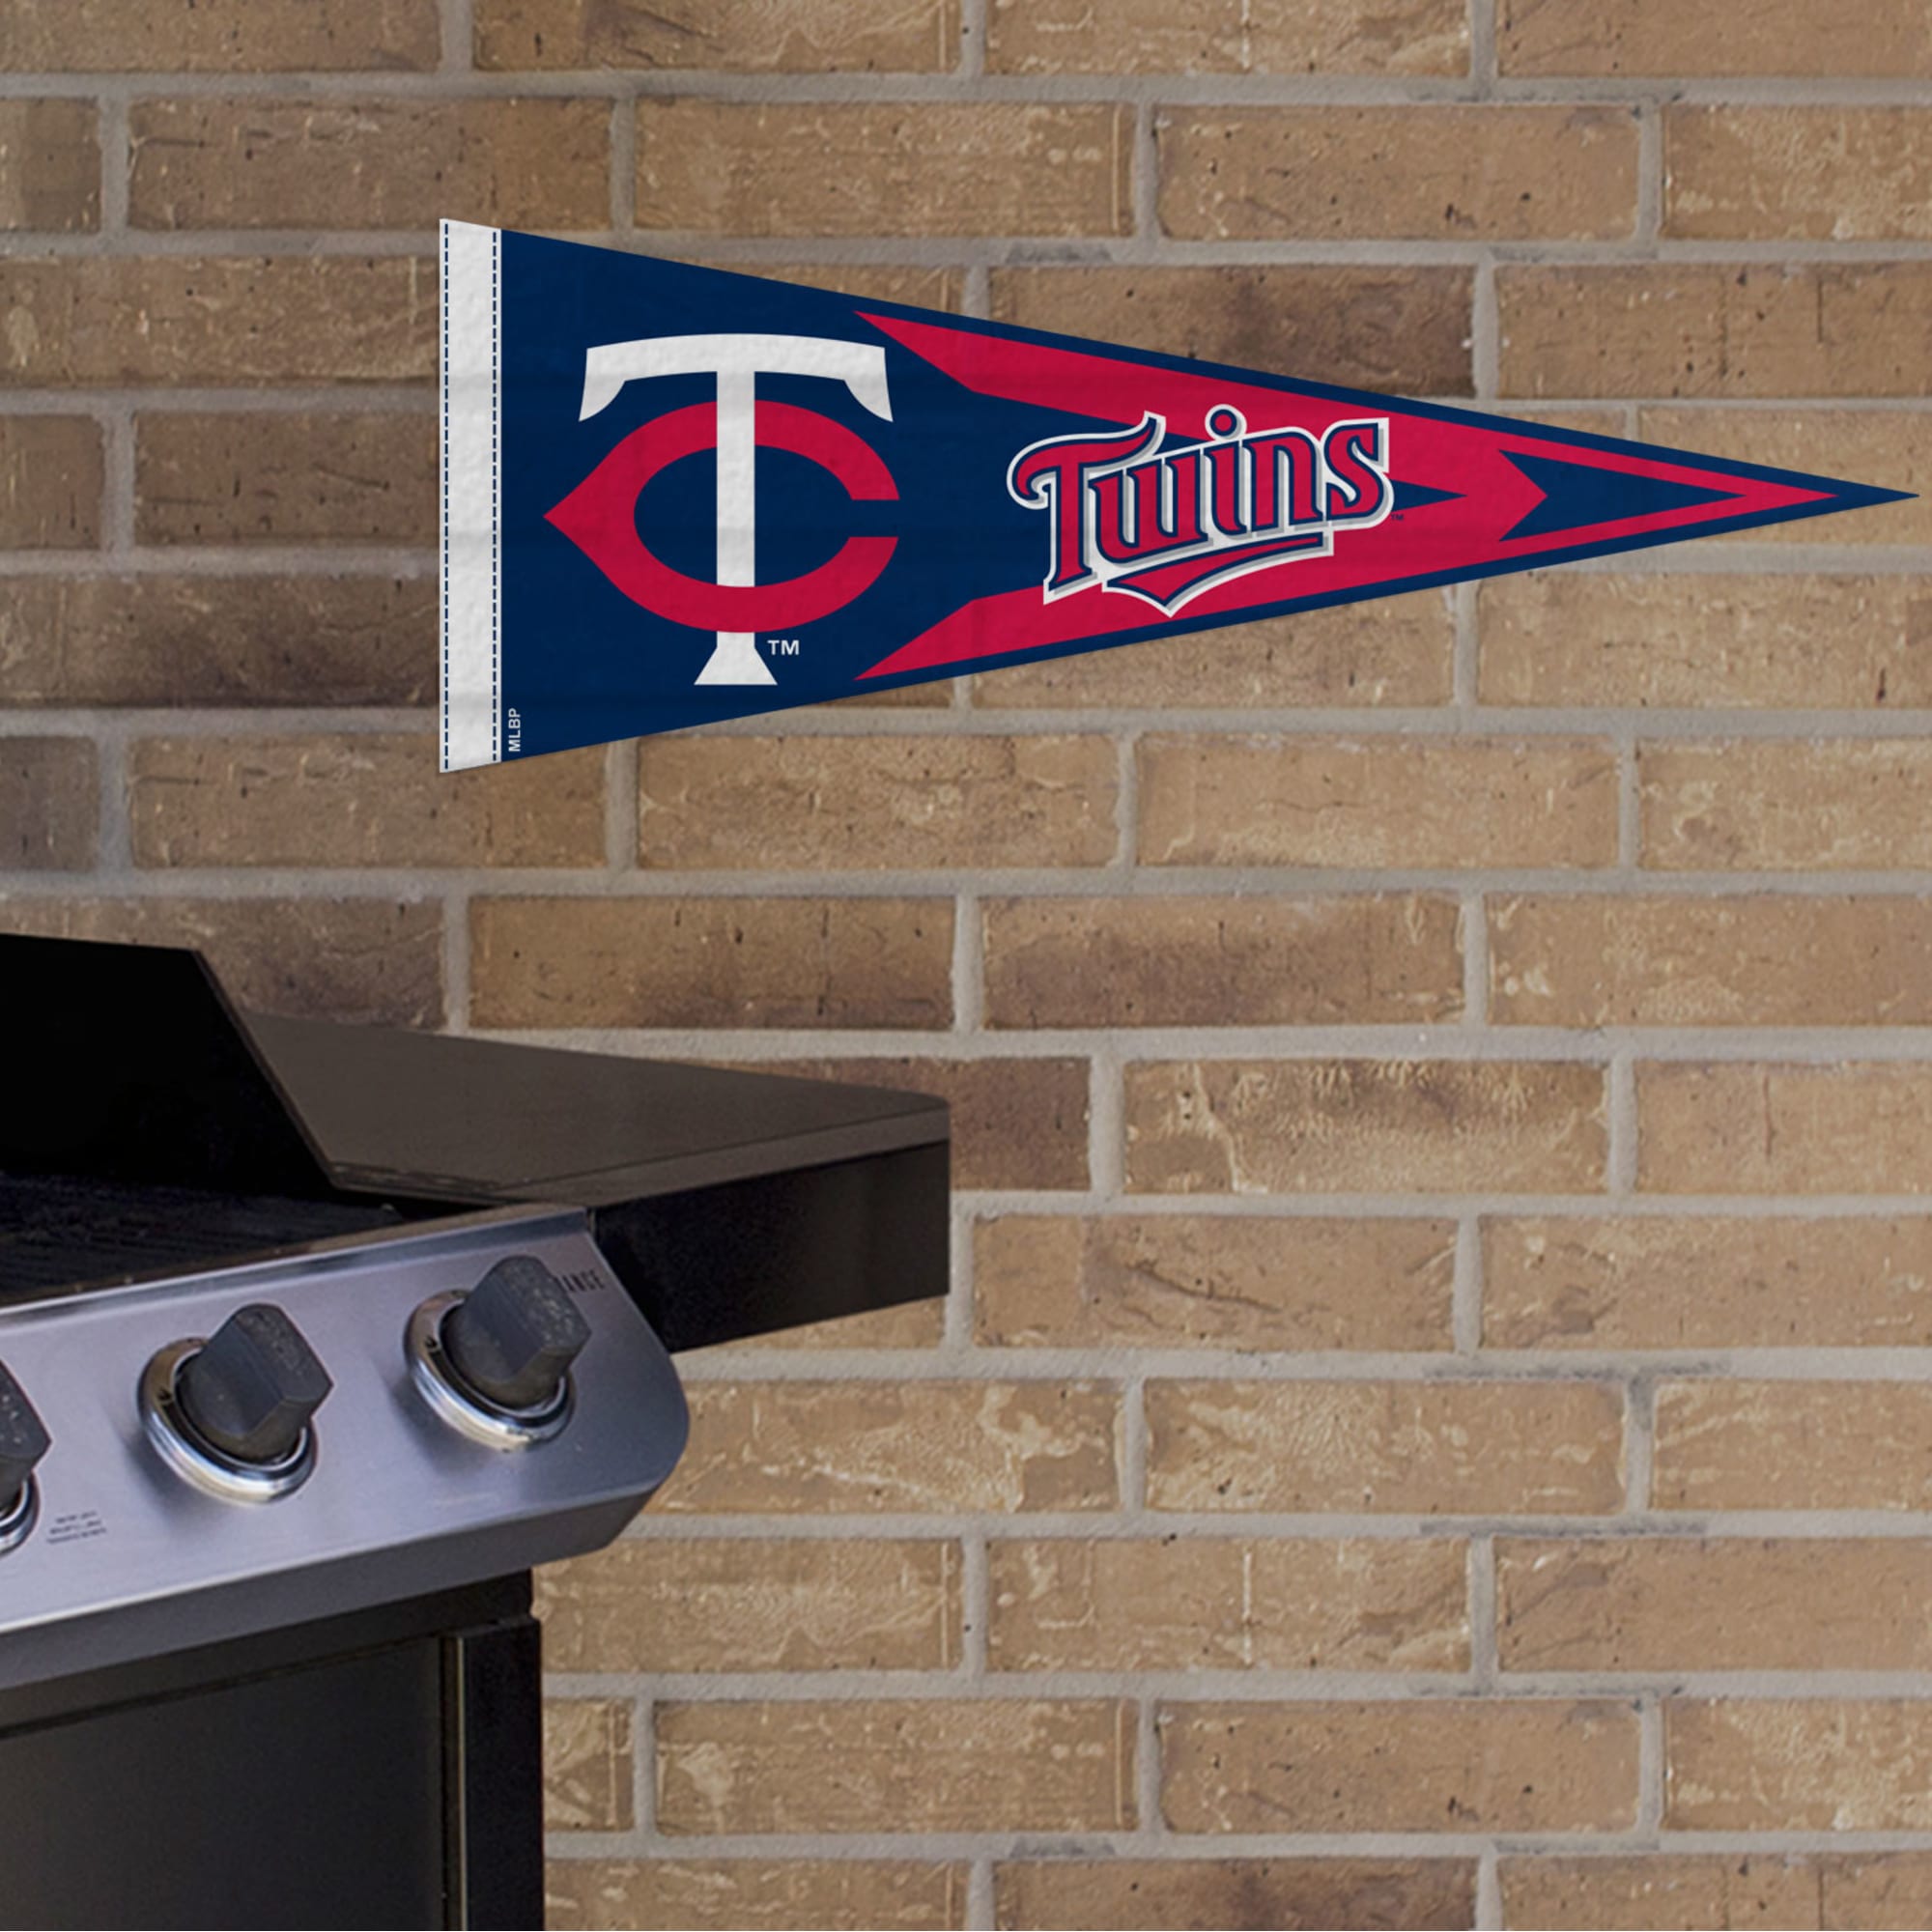 Minnesota Twins: Pennant - Officially Licensed MLB Outdoor Graphic 24.0"W x 9.0"H by Fathead | Wood/Aluminum